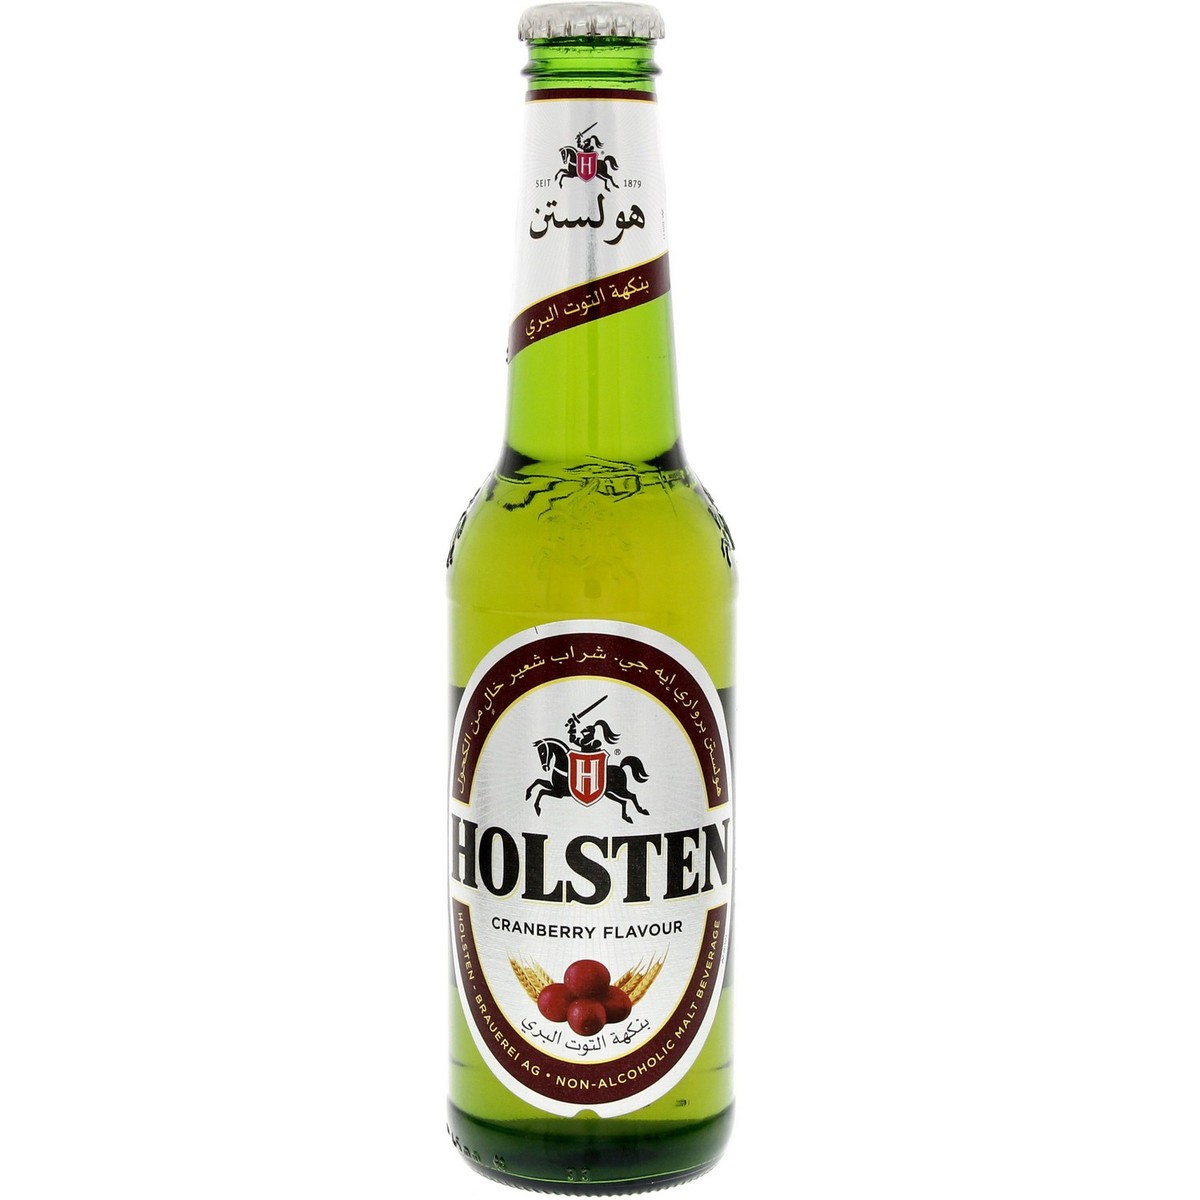 Holsten Cranberry Flavour Non Alcoholic Beer 6 x 330 ml